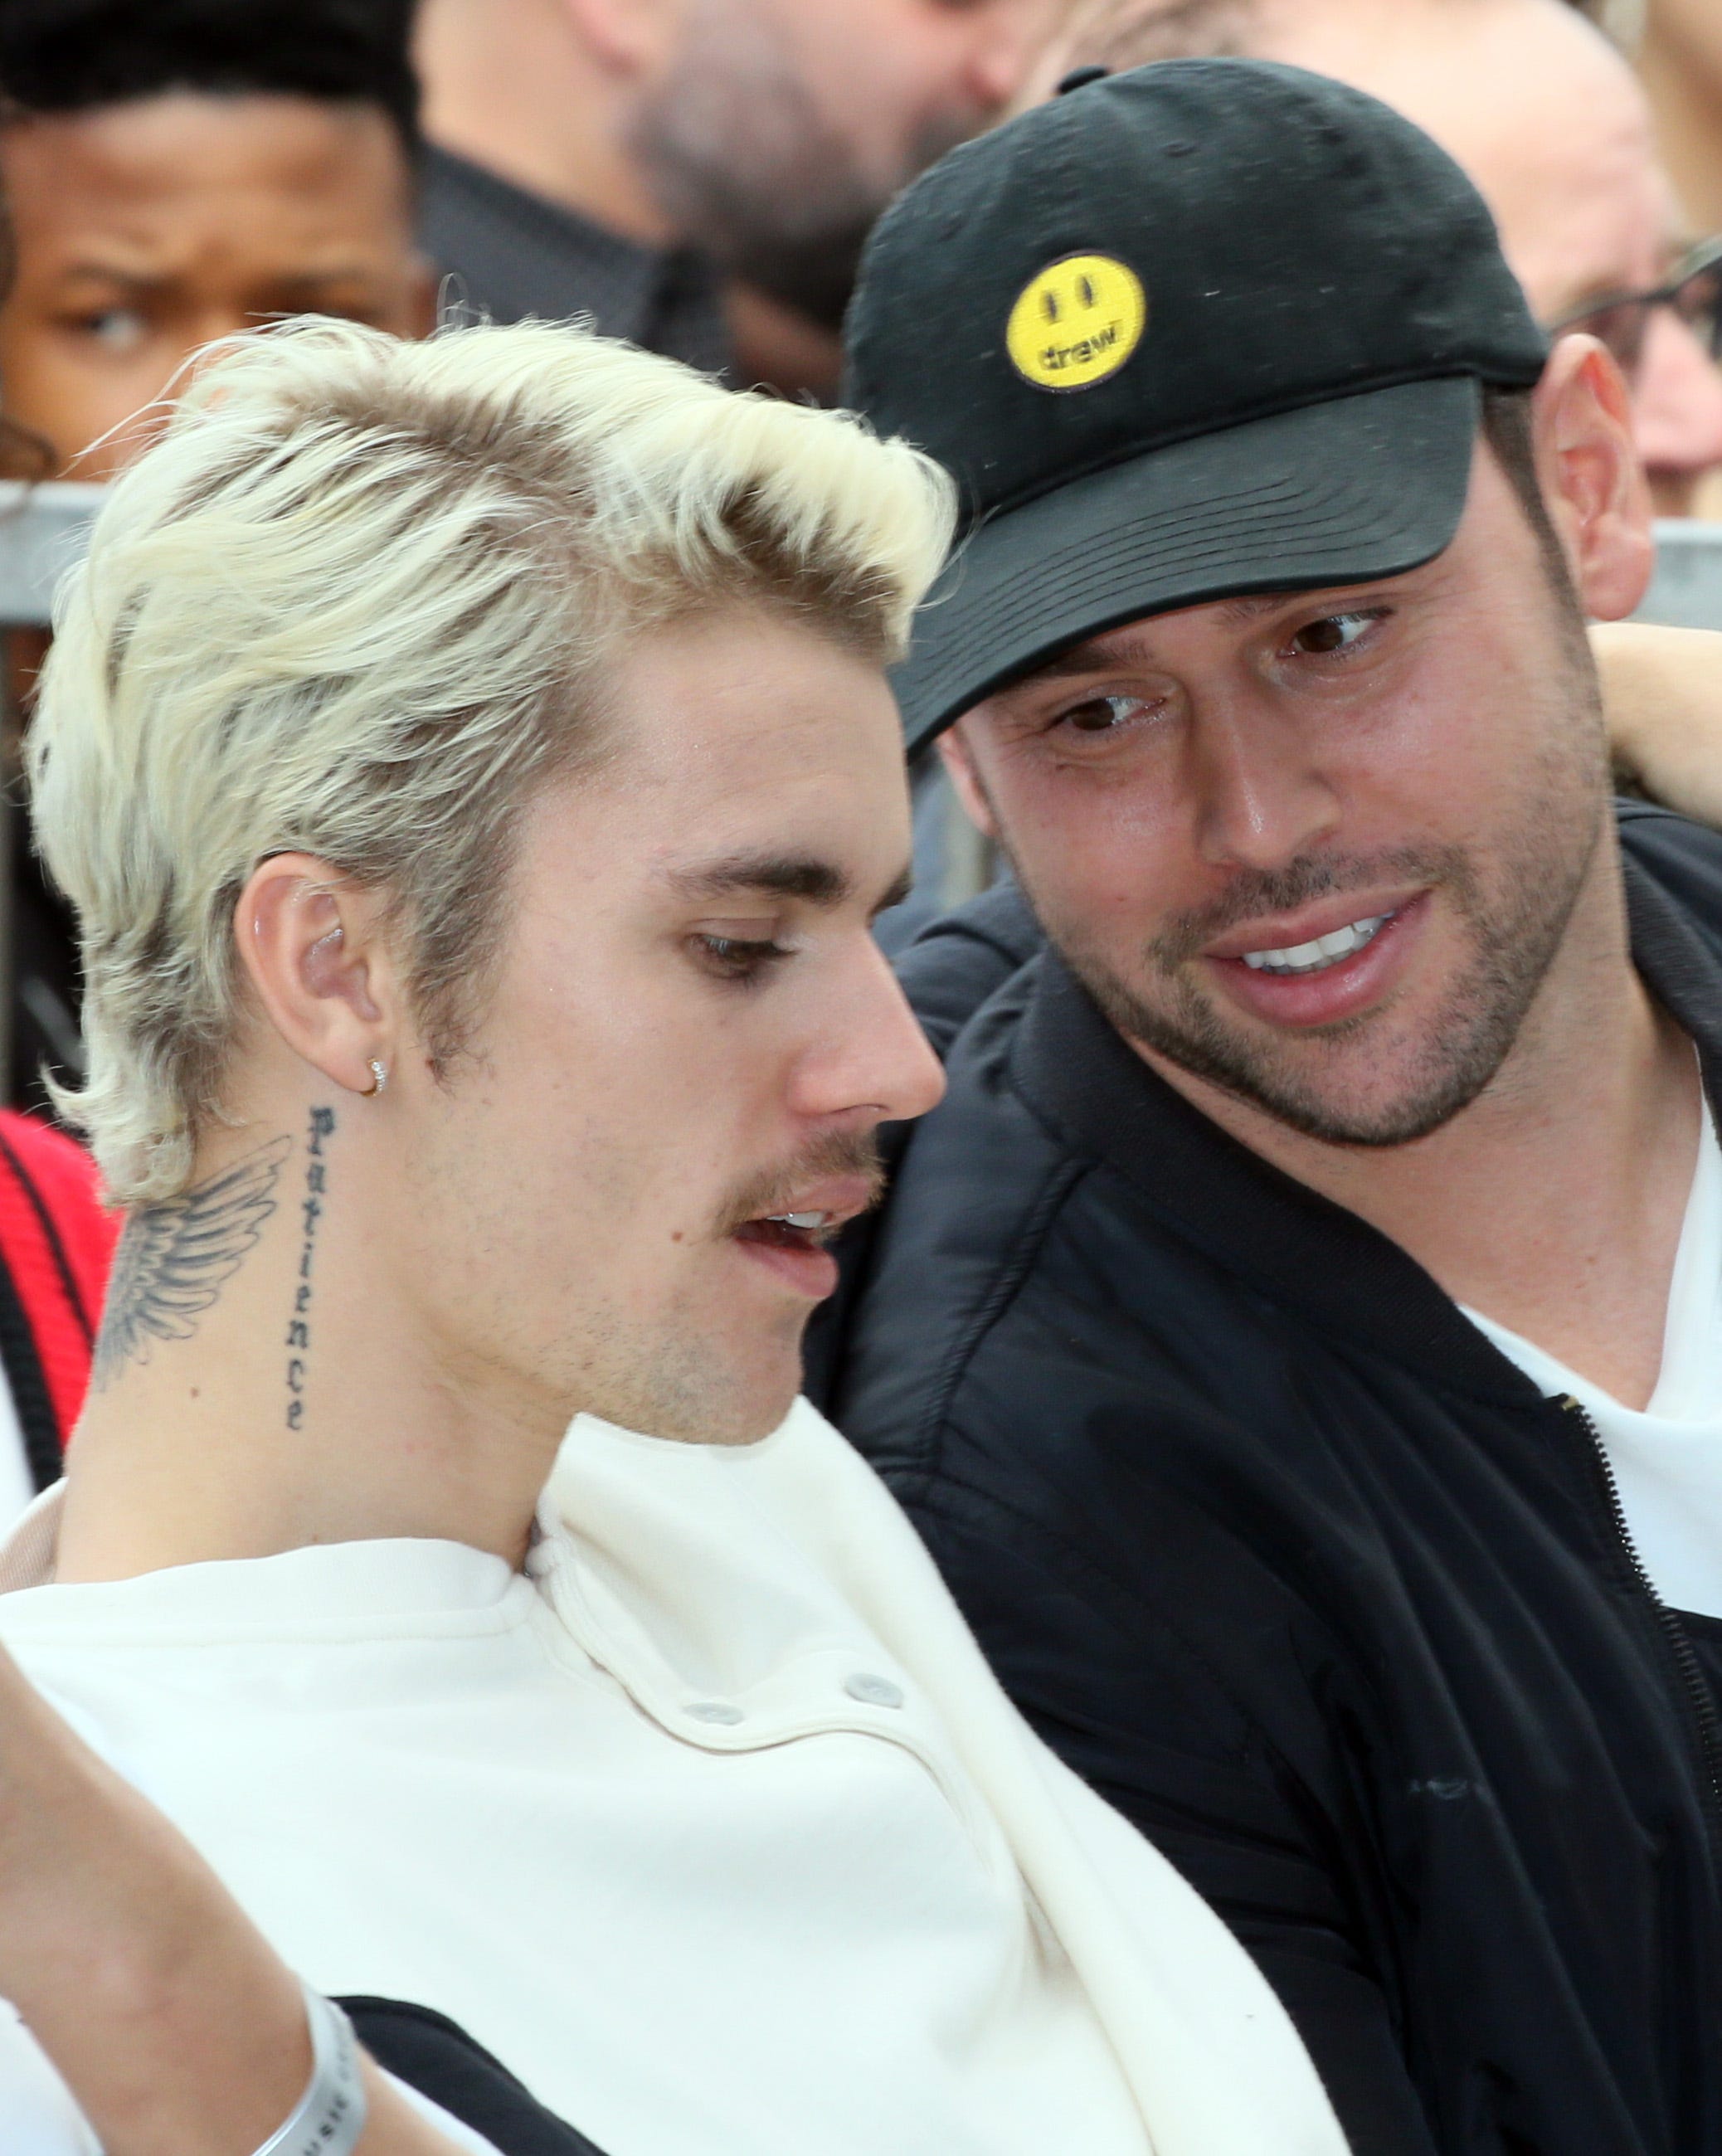 Bieber doc: Scooter Braun wishes he put him in therapy 'day 1'